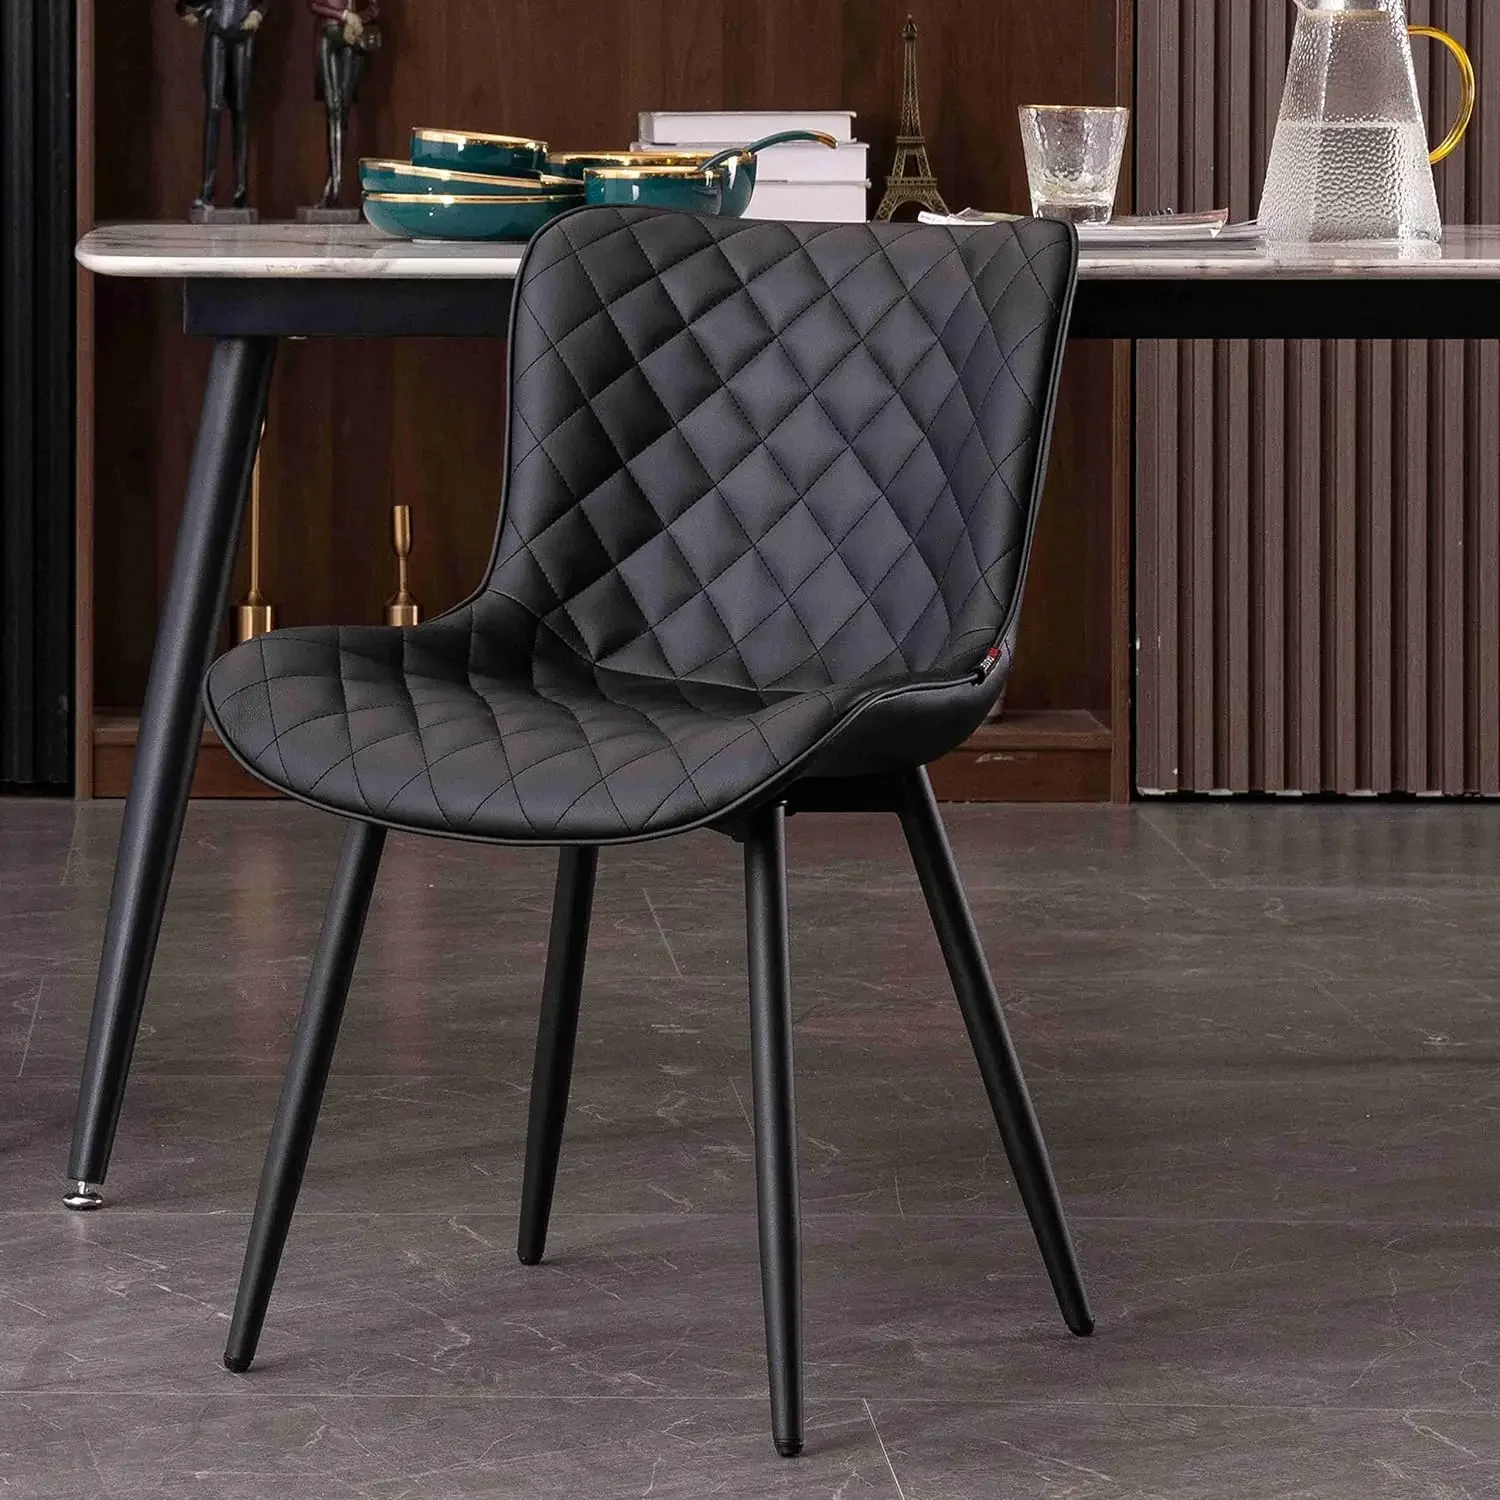 

YOUTASTE Black Dining Chairs Set of 2 Mid Century Modern PU Leather Diamond Upholstered Accent Guest Dinner Chair with Back